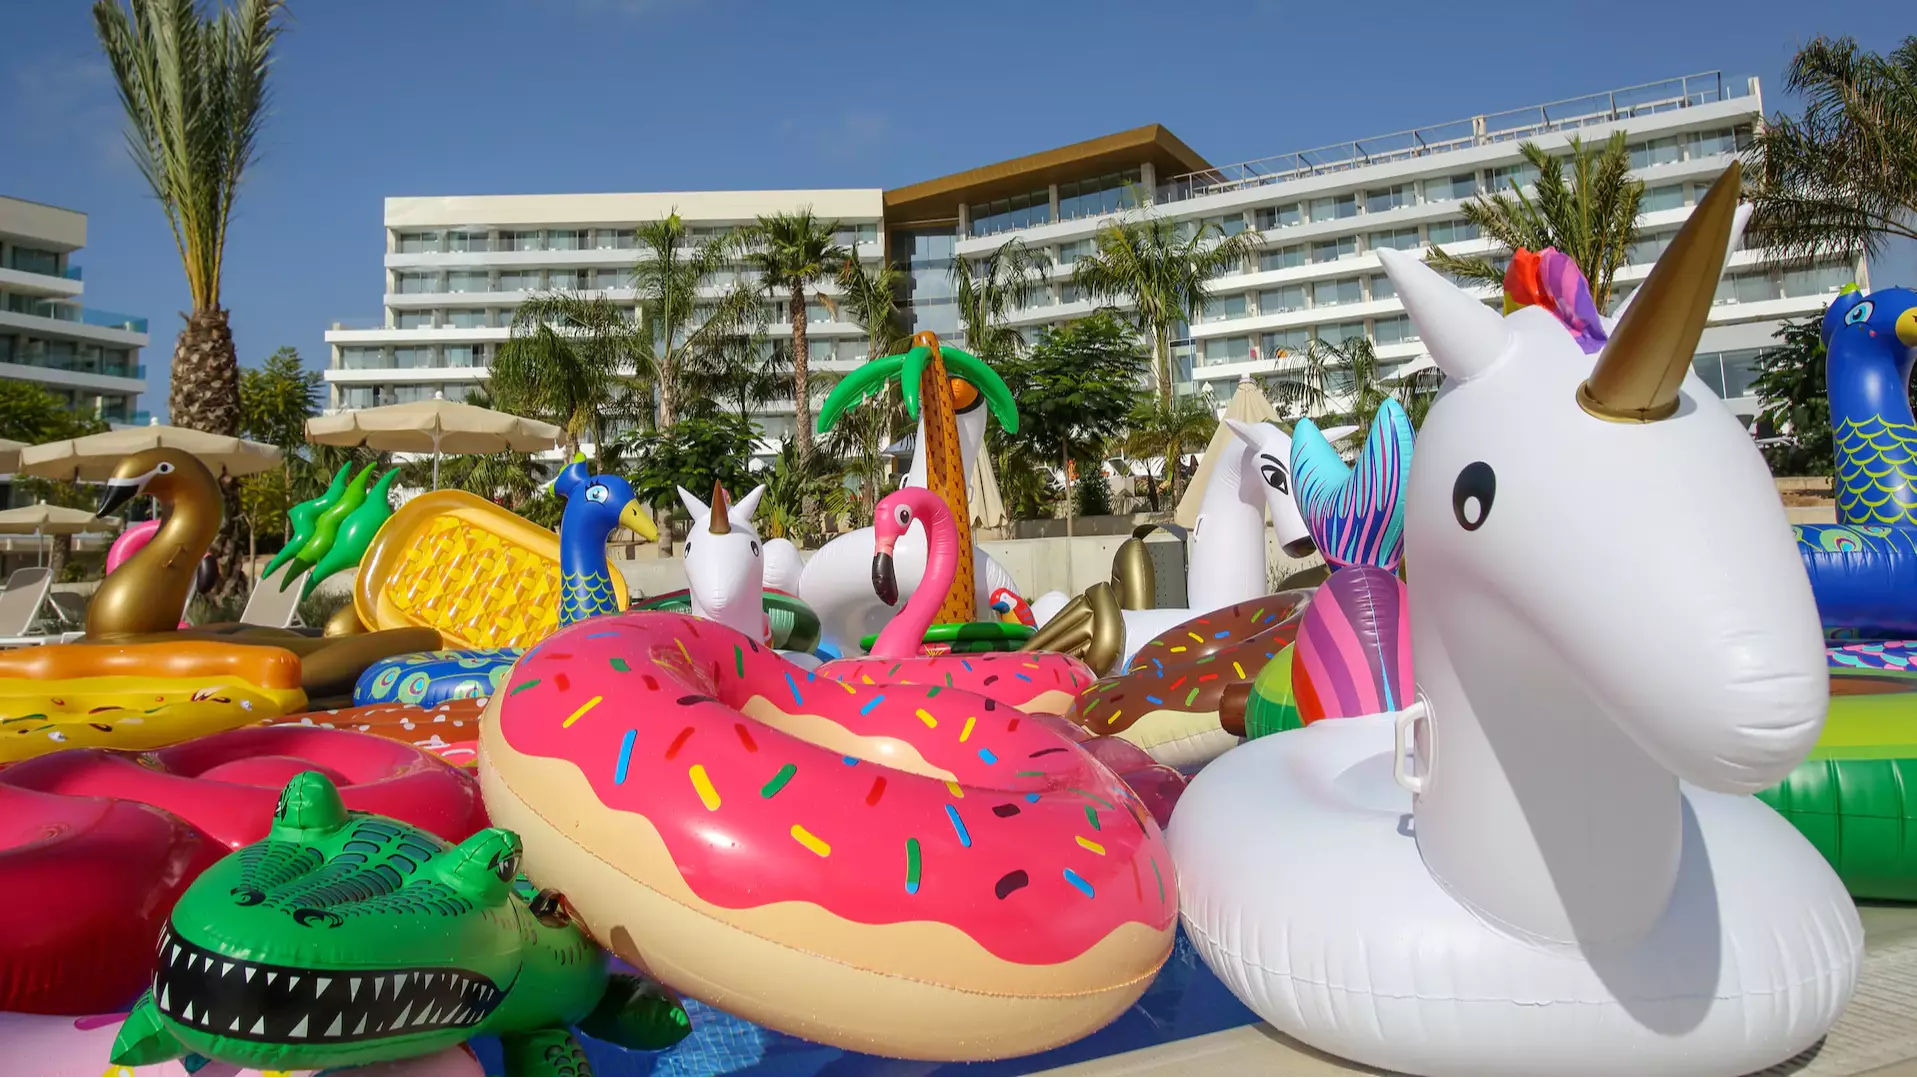 Spanish Hotel Sets Up 'Sanctuary' For Abandoned Inflatables 